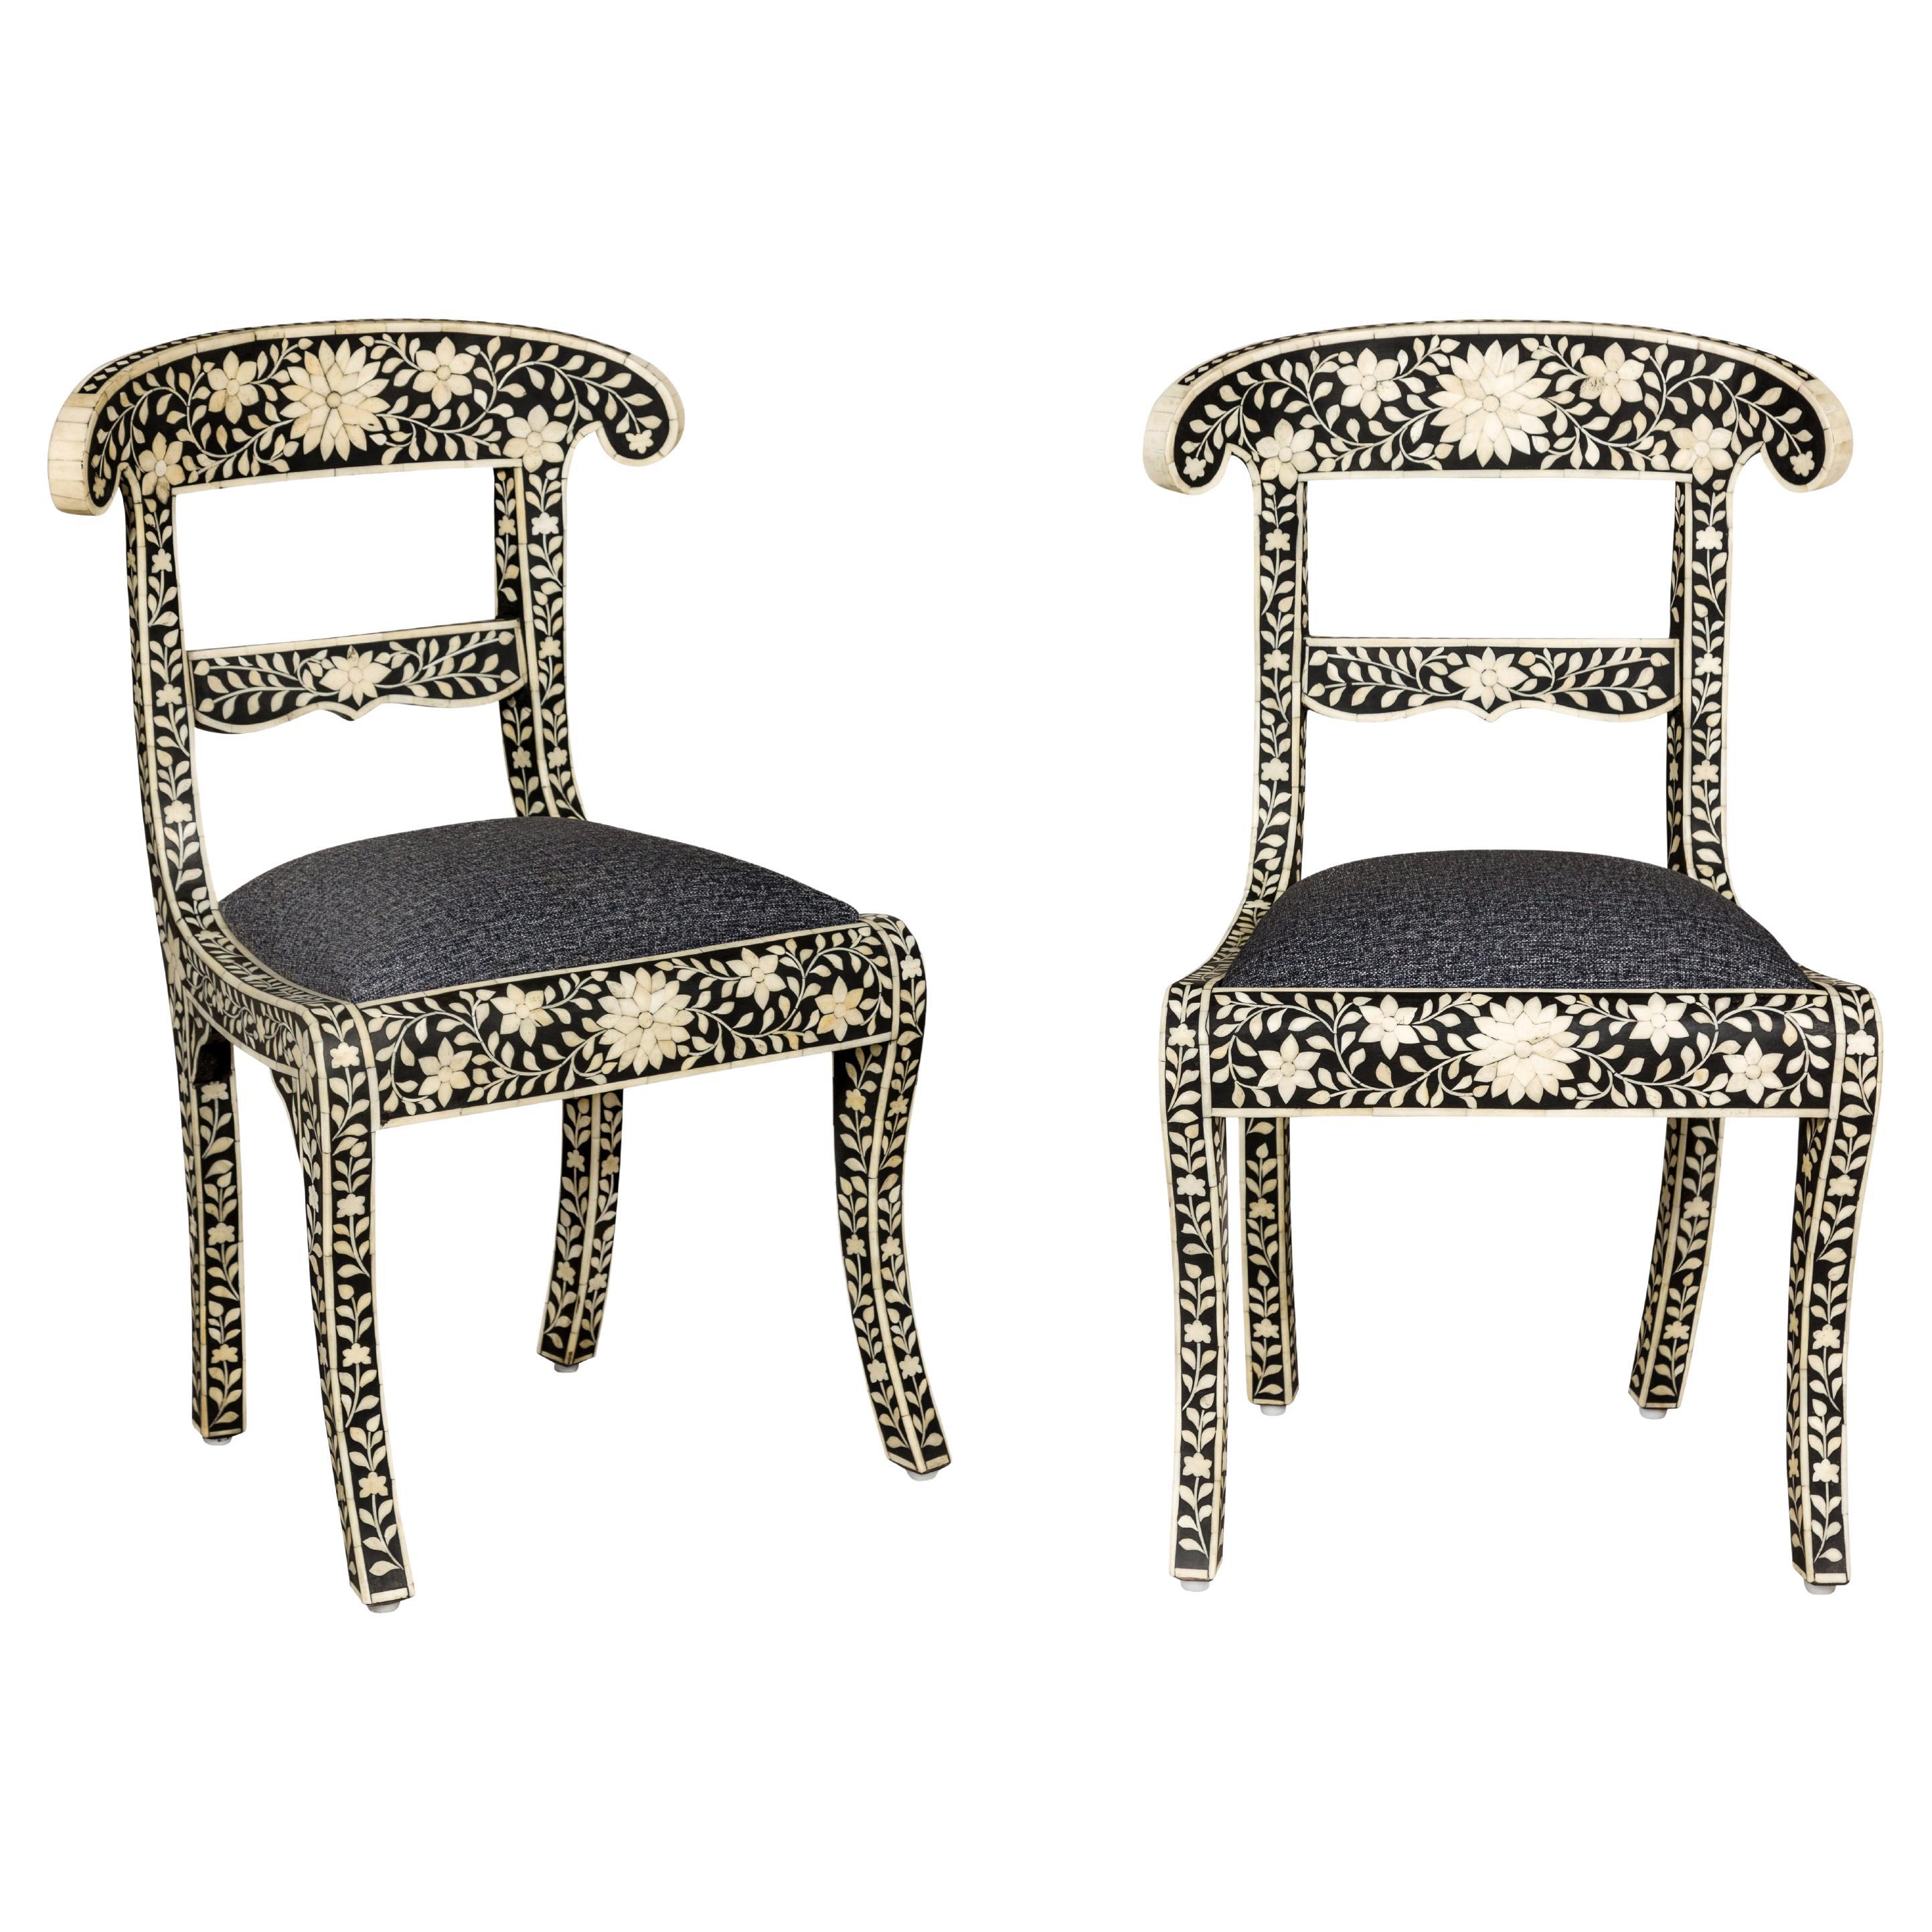 Anglo-Indian Style Ebonized Side Chairs with Floral Themed Bone Inlay, a Pair For Sale